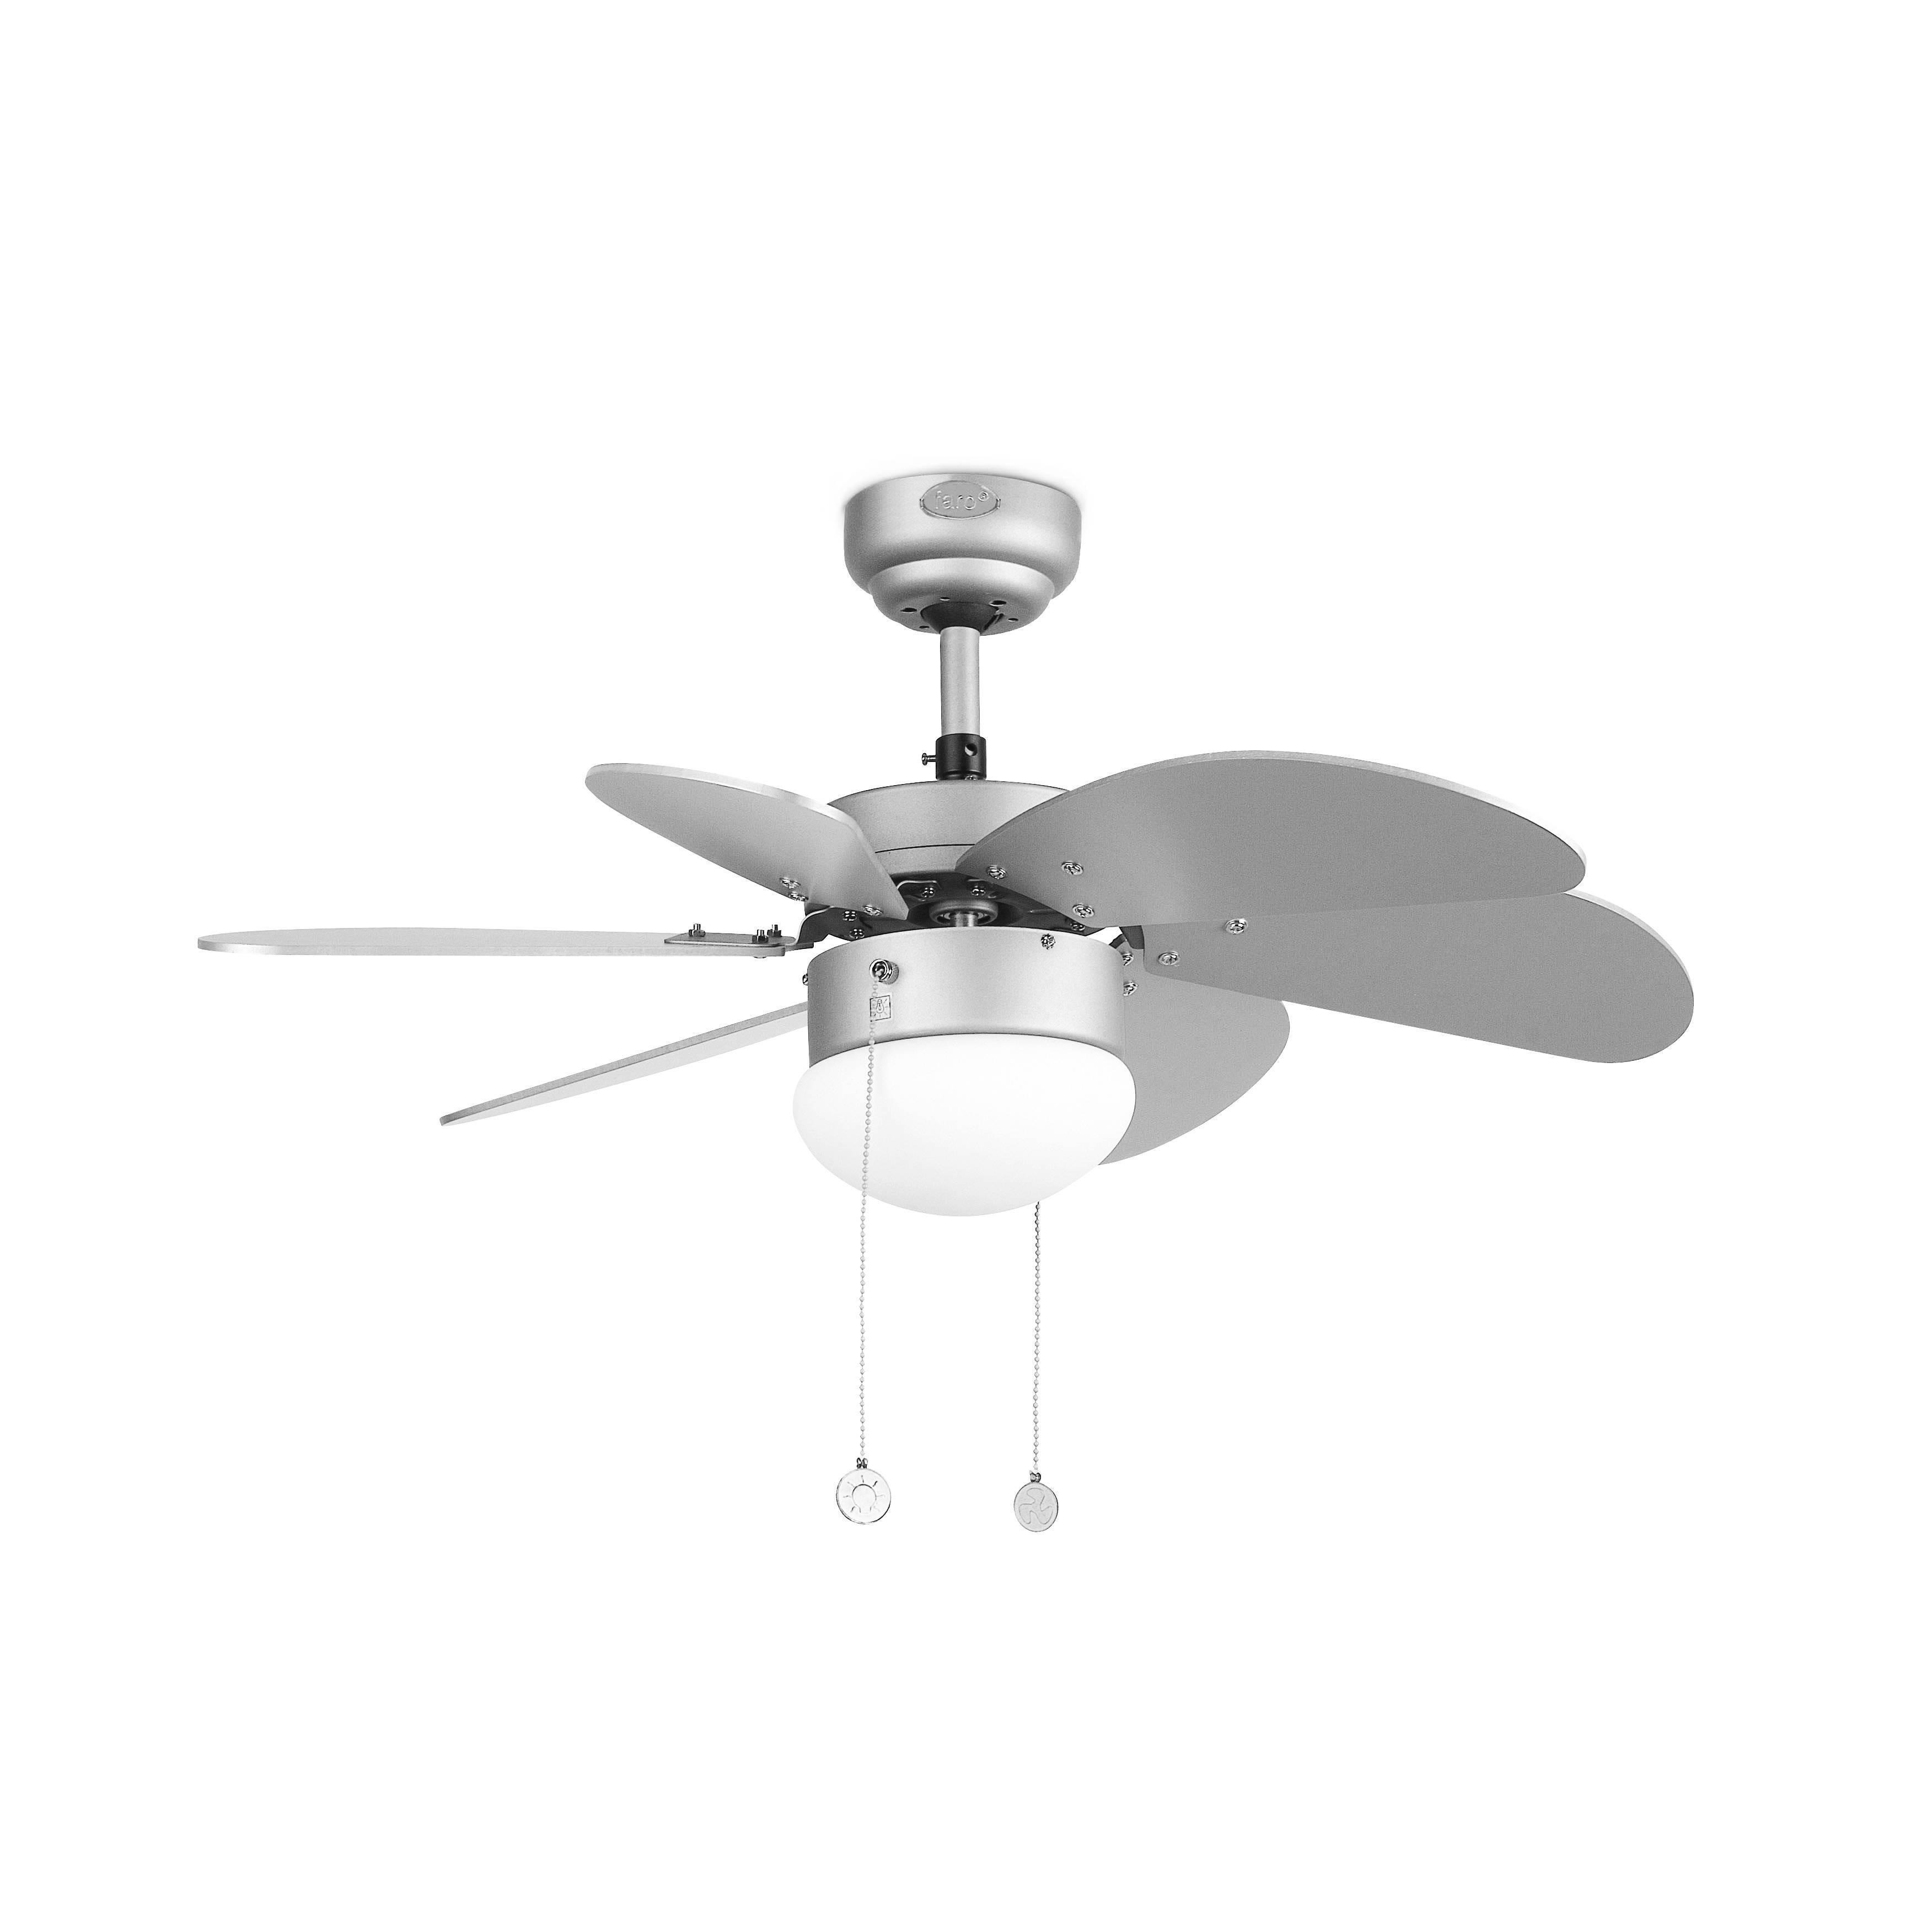 Palao 1 Light Small Ceiling Fan Grey with Light E14 - image 1